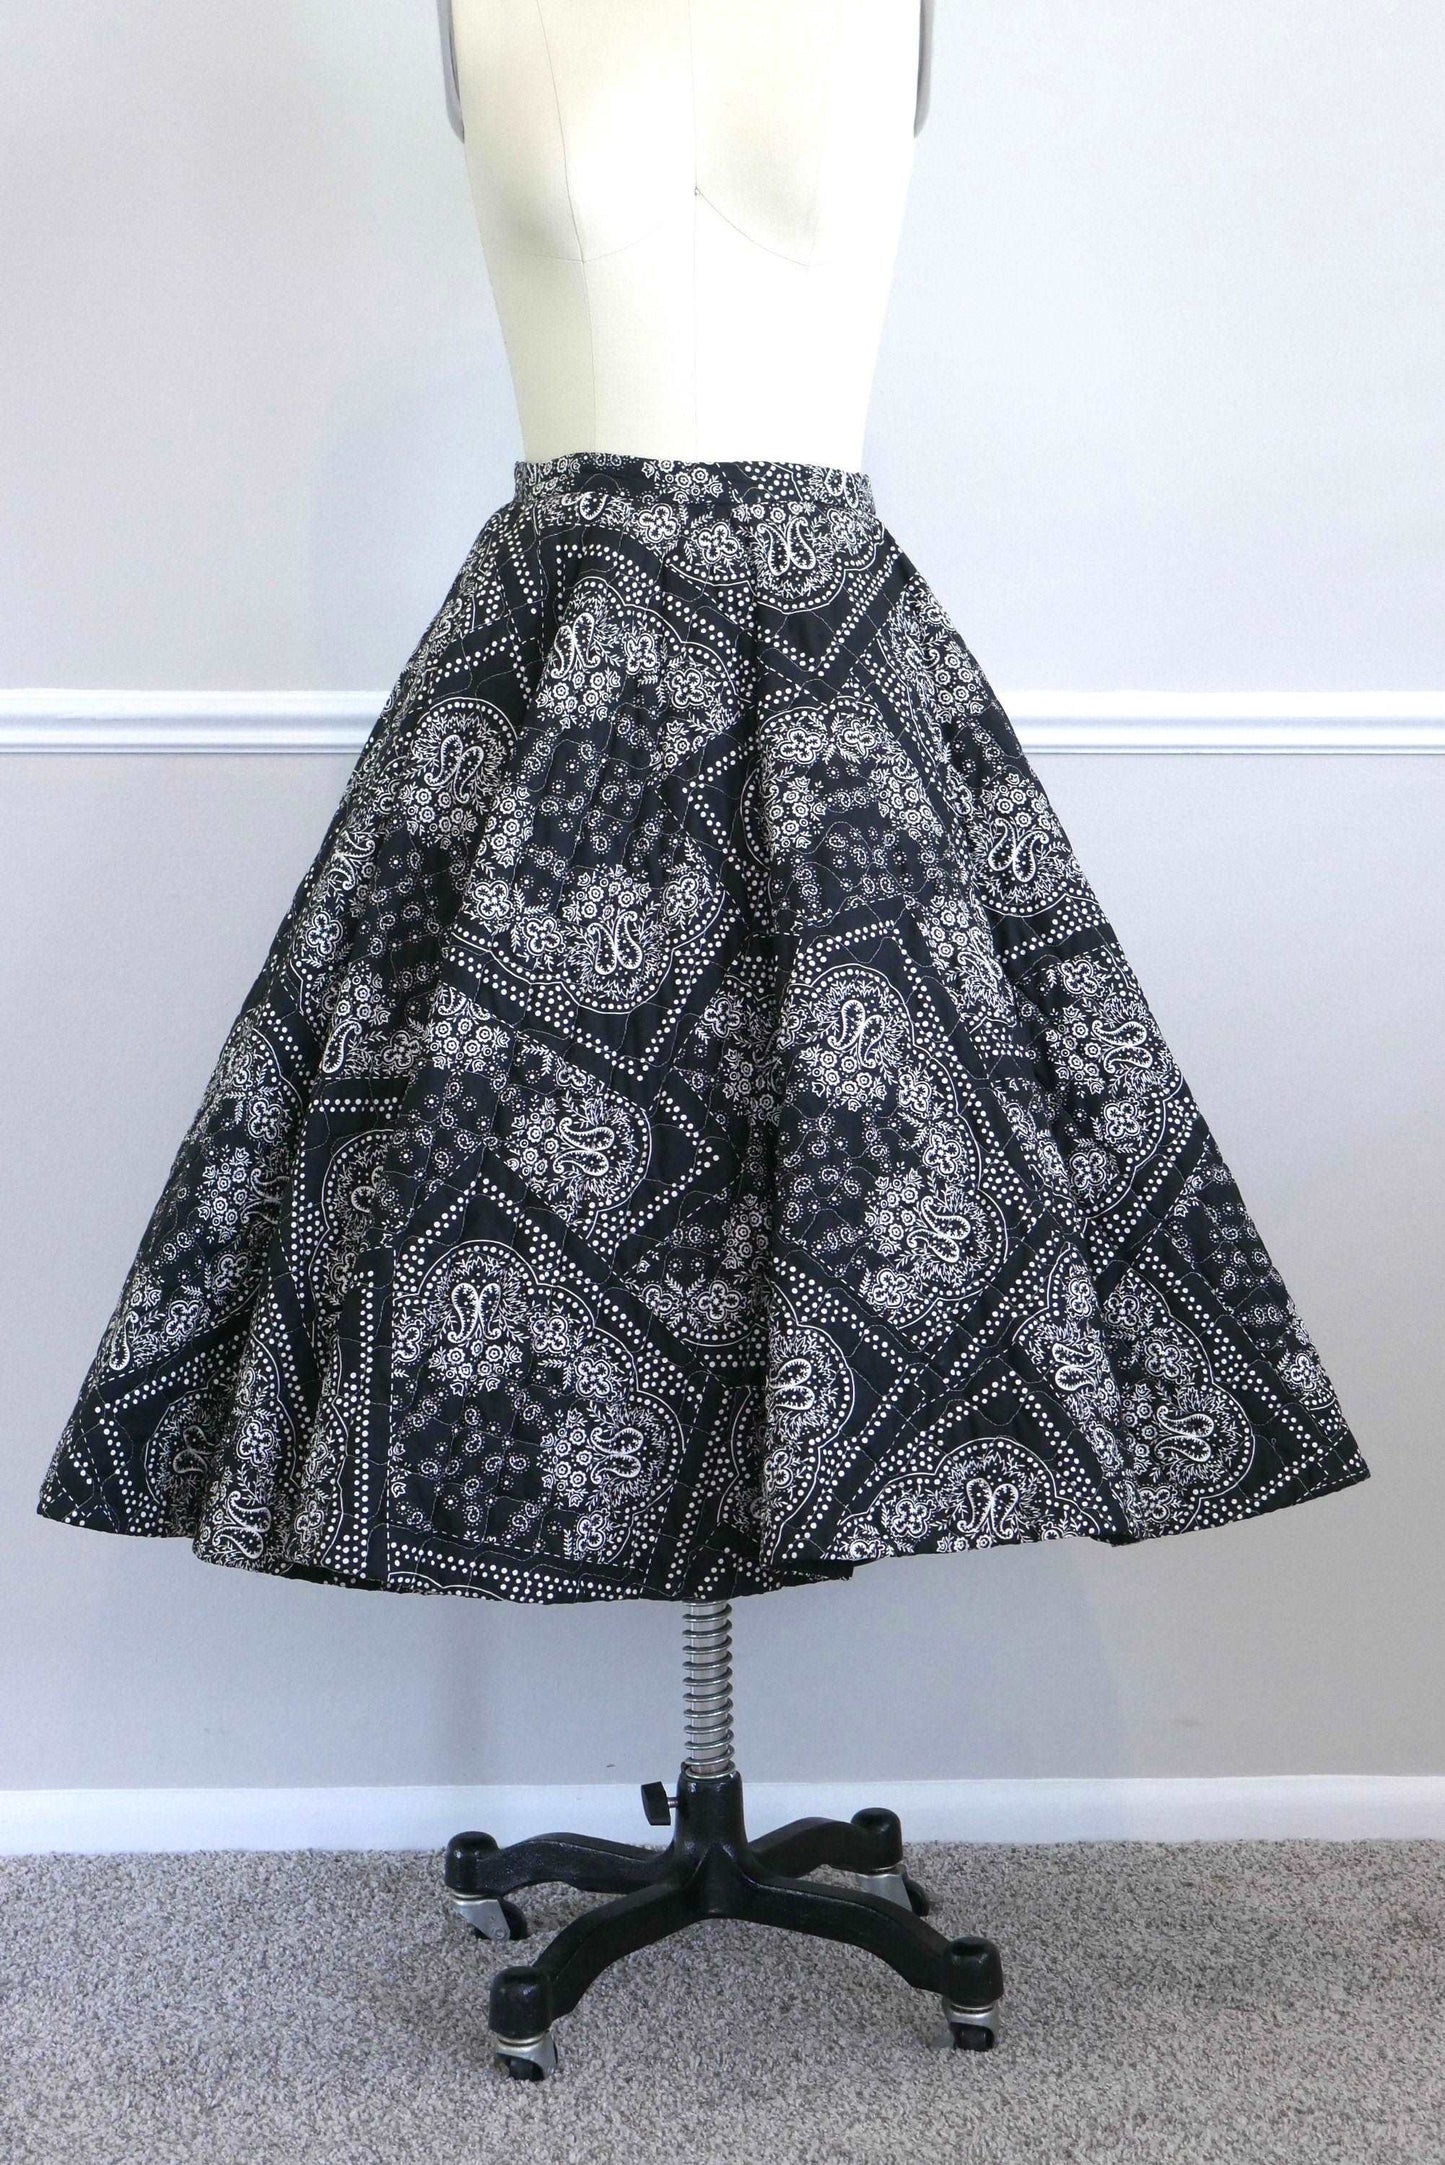 ON SALE Vintage 1950s Hanky Print Quilted Circle Skirt / 50s navy blue fit and flare skirt size s